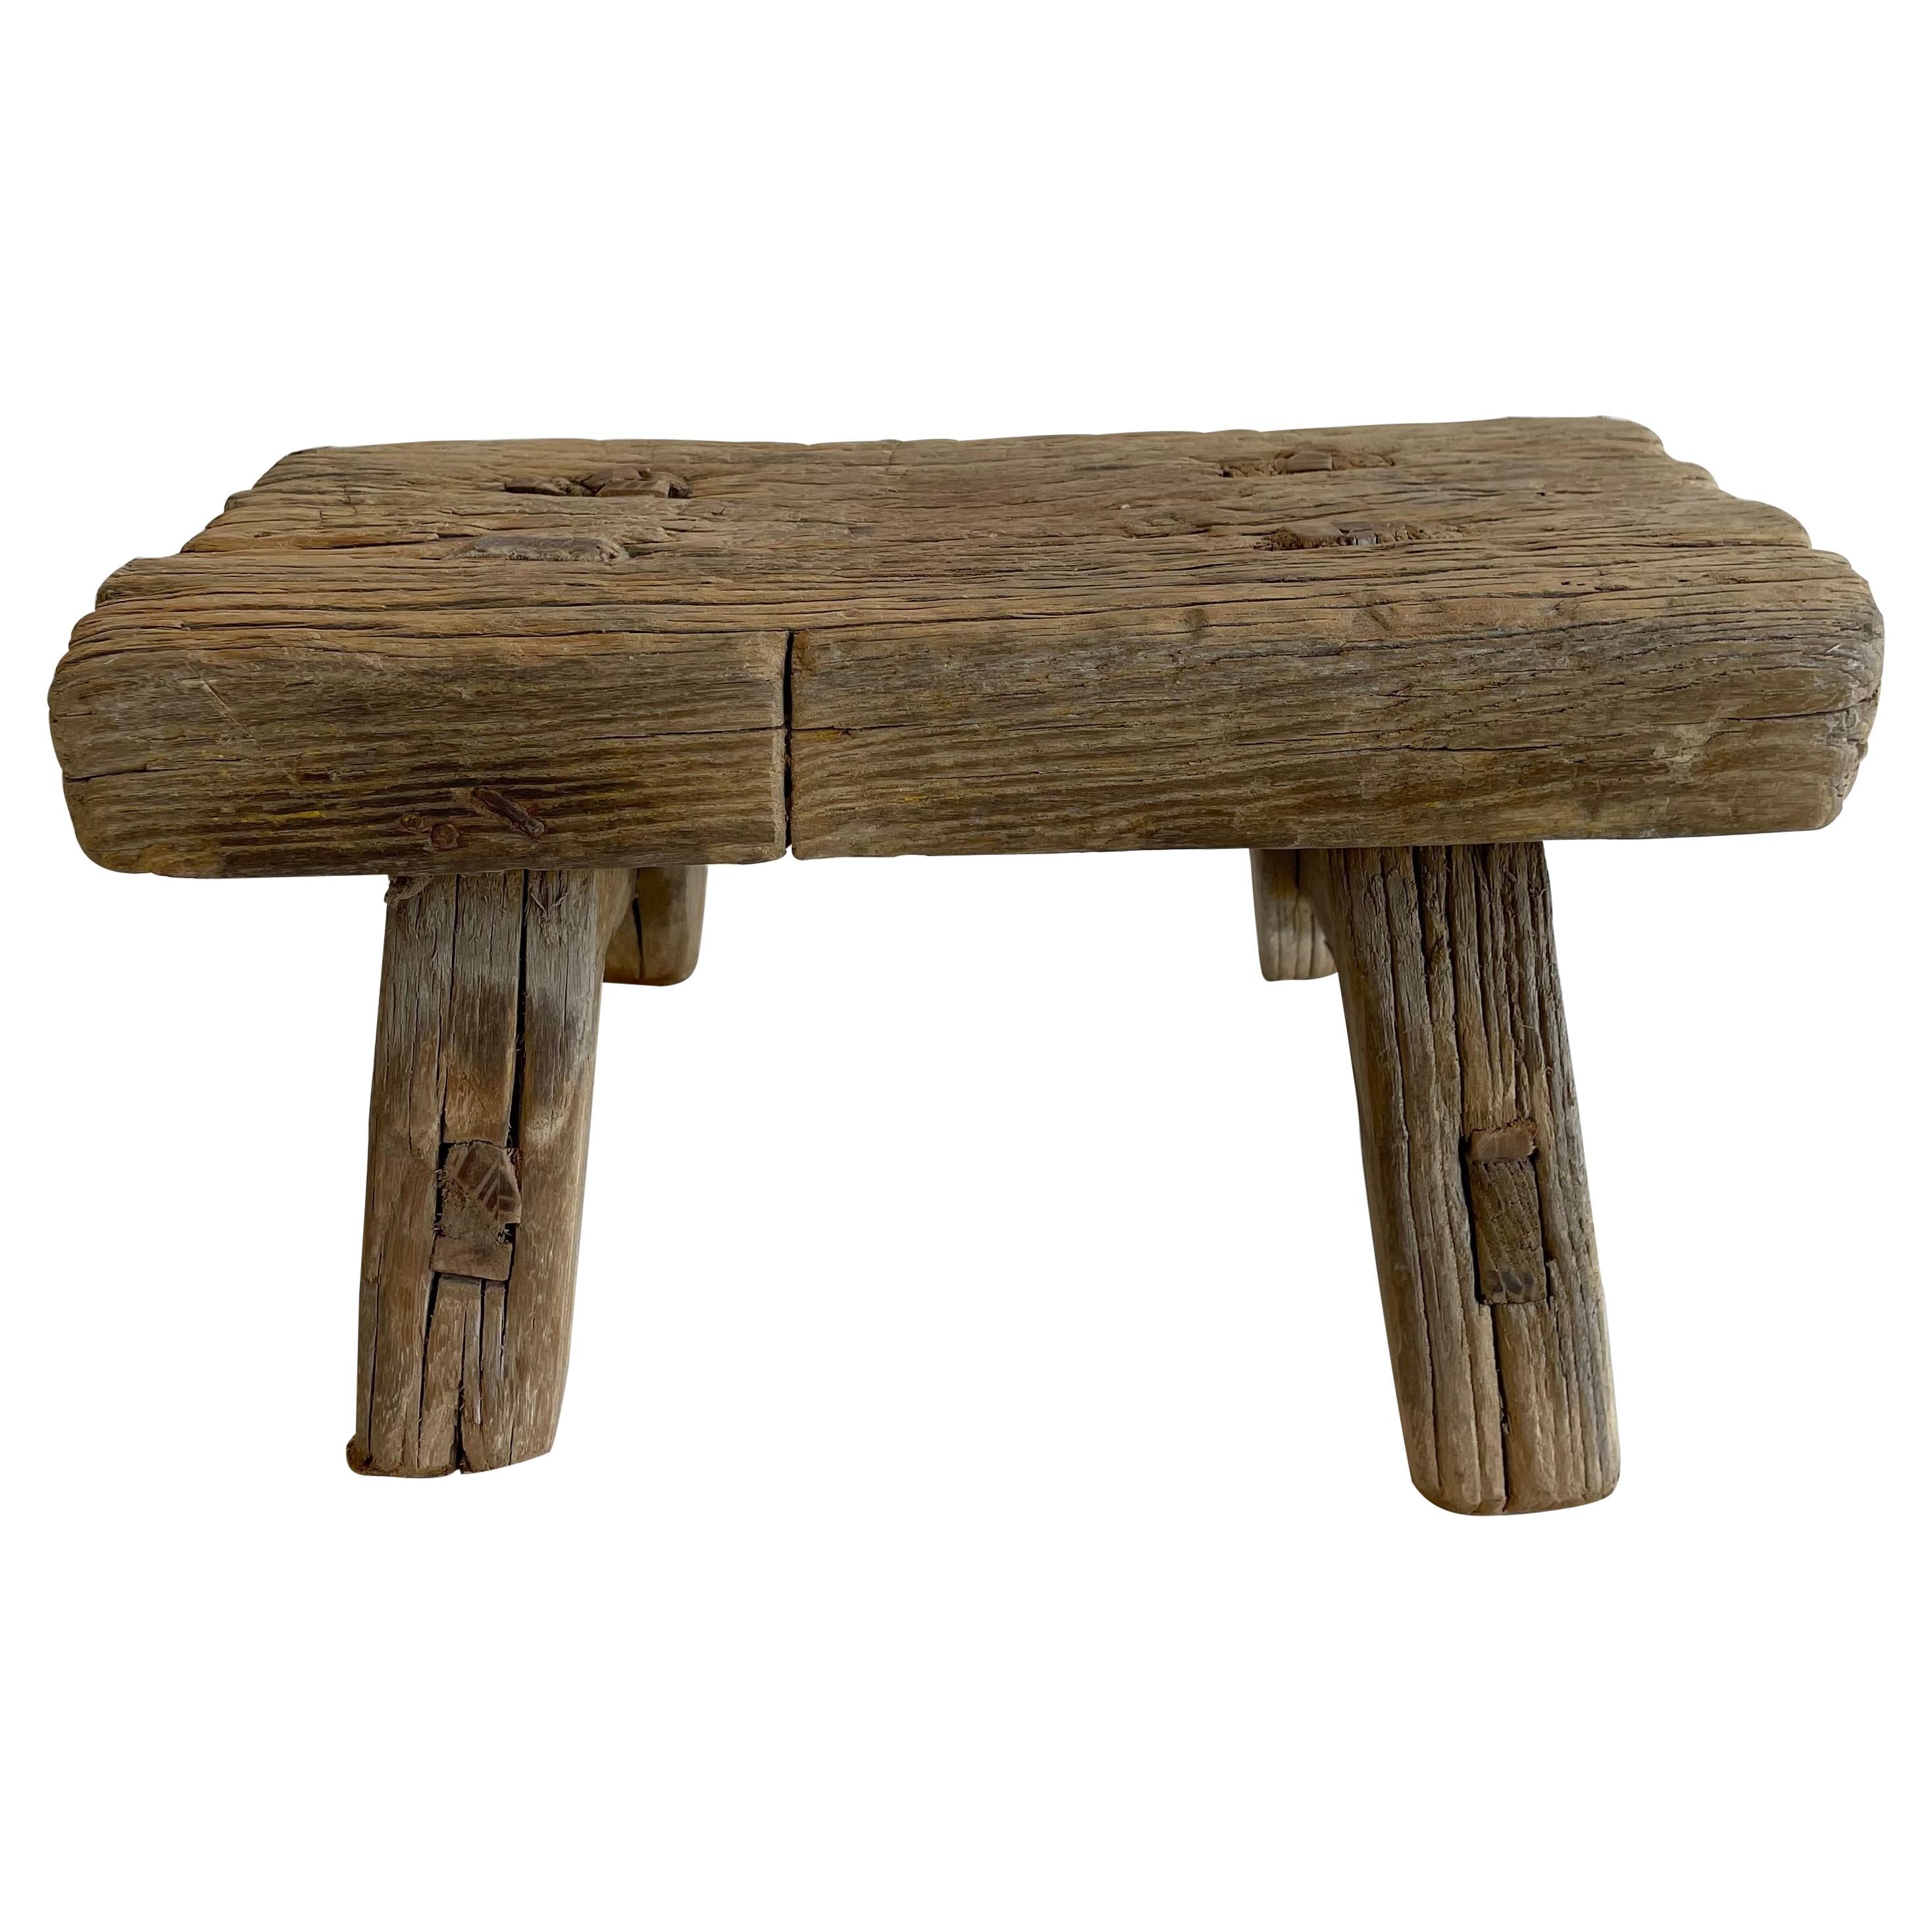 Antique Elm Wood Mini Stool with Thick Top